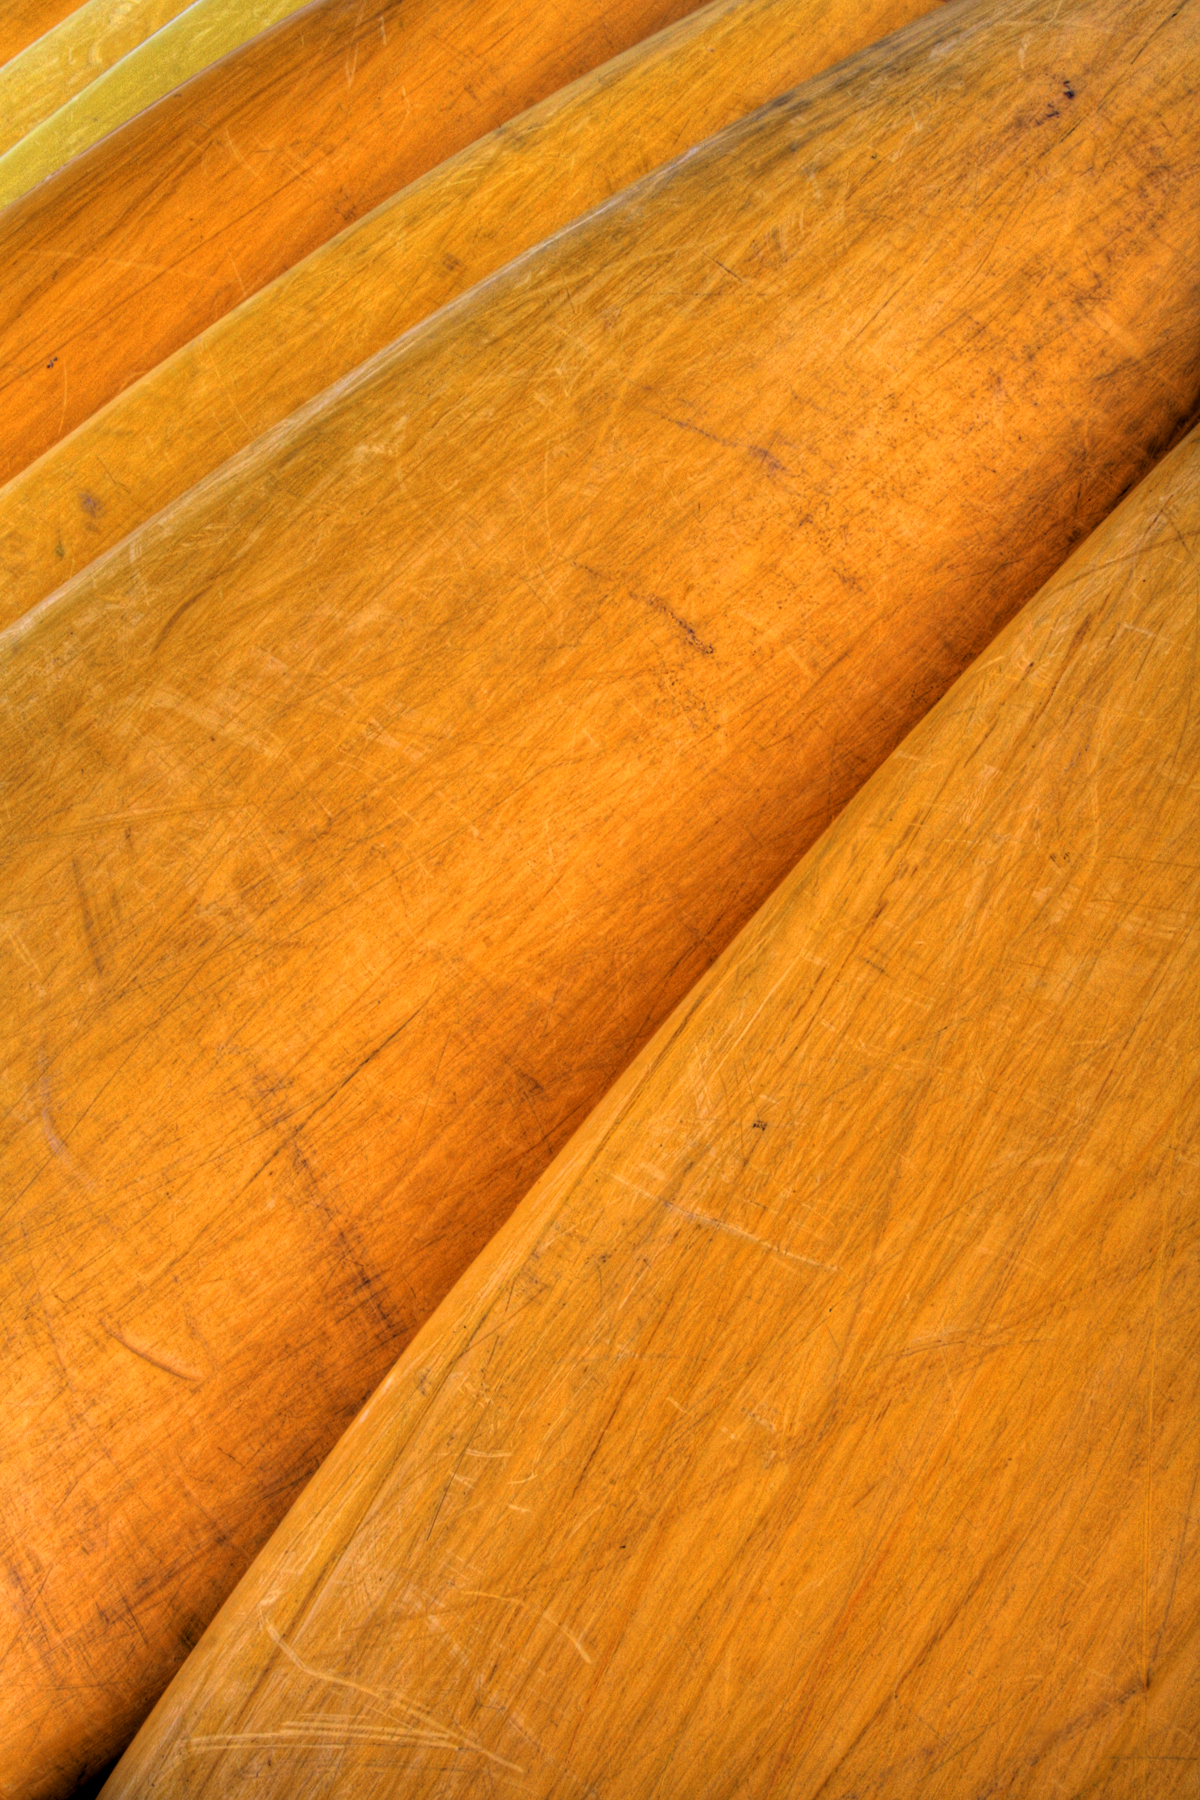 Wood Canoes Texture - HDR, Abstract, Scratches, Kayaks, Orange, HQ Photo